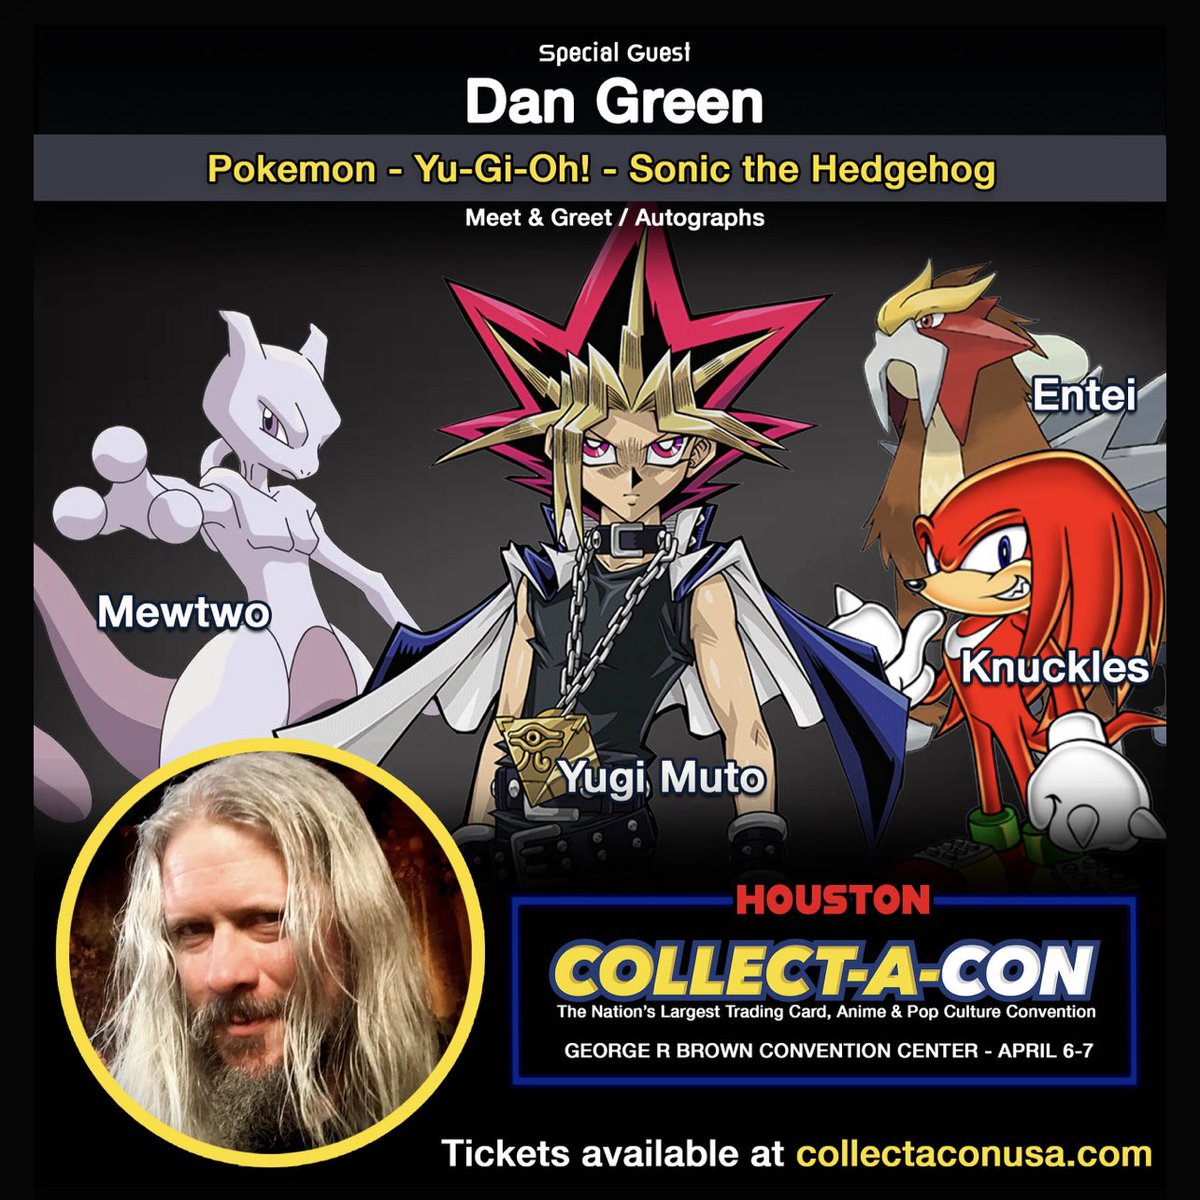 Looking forward to mixing it up with the anime community in Houston this weekend!!